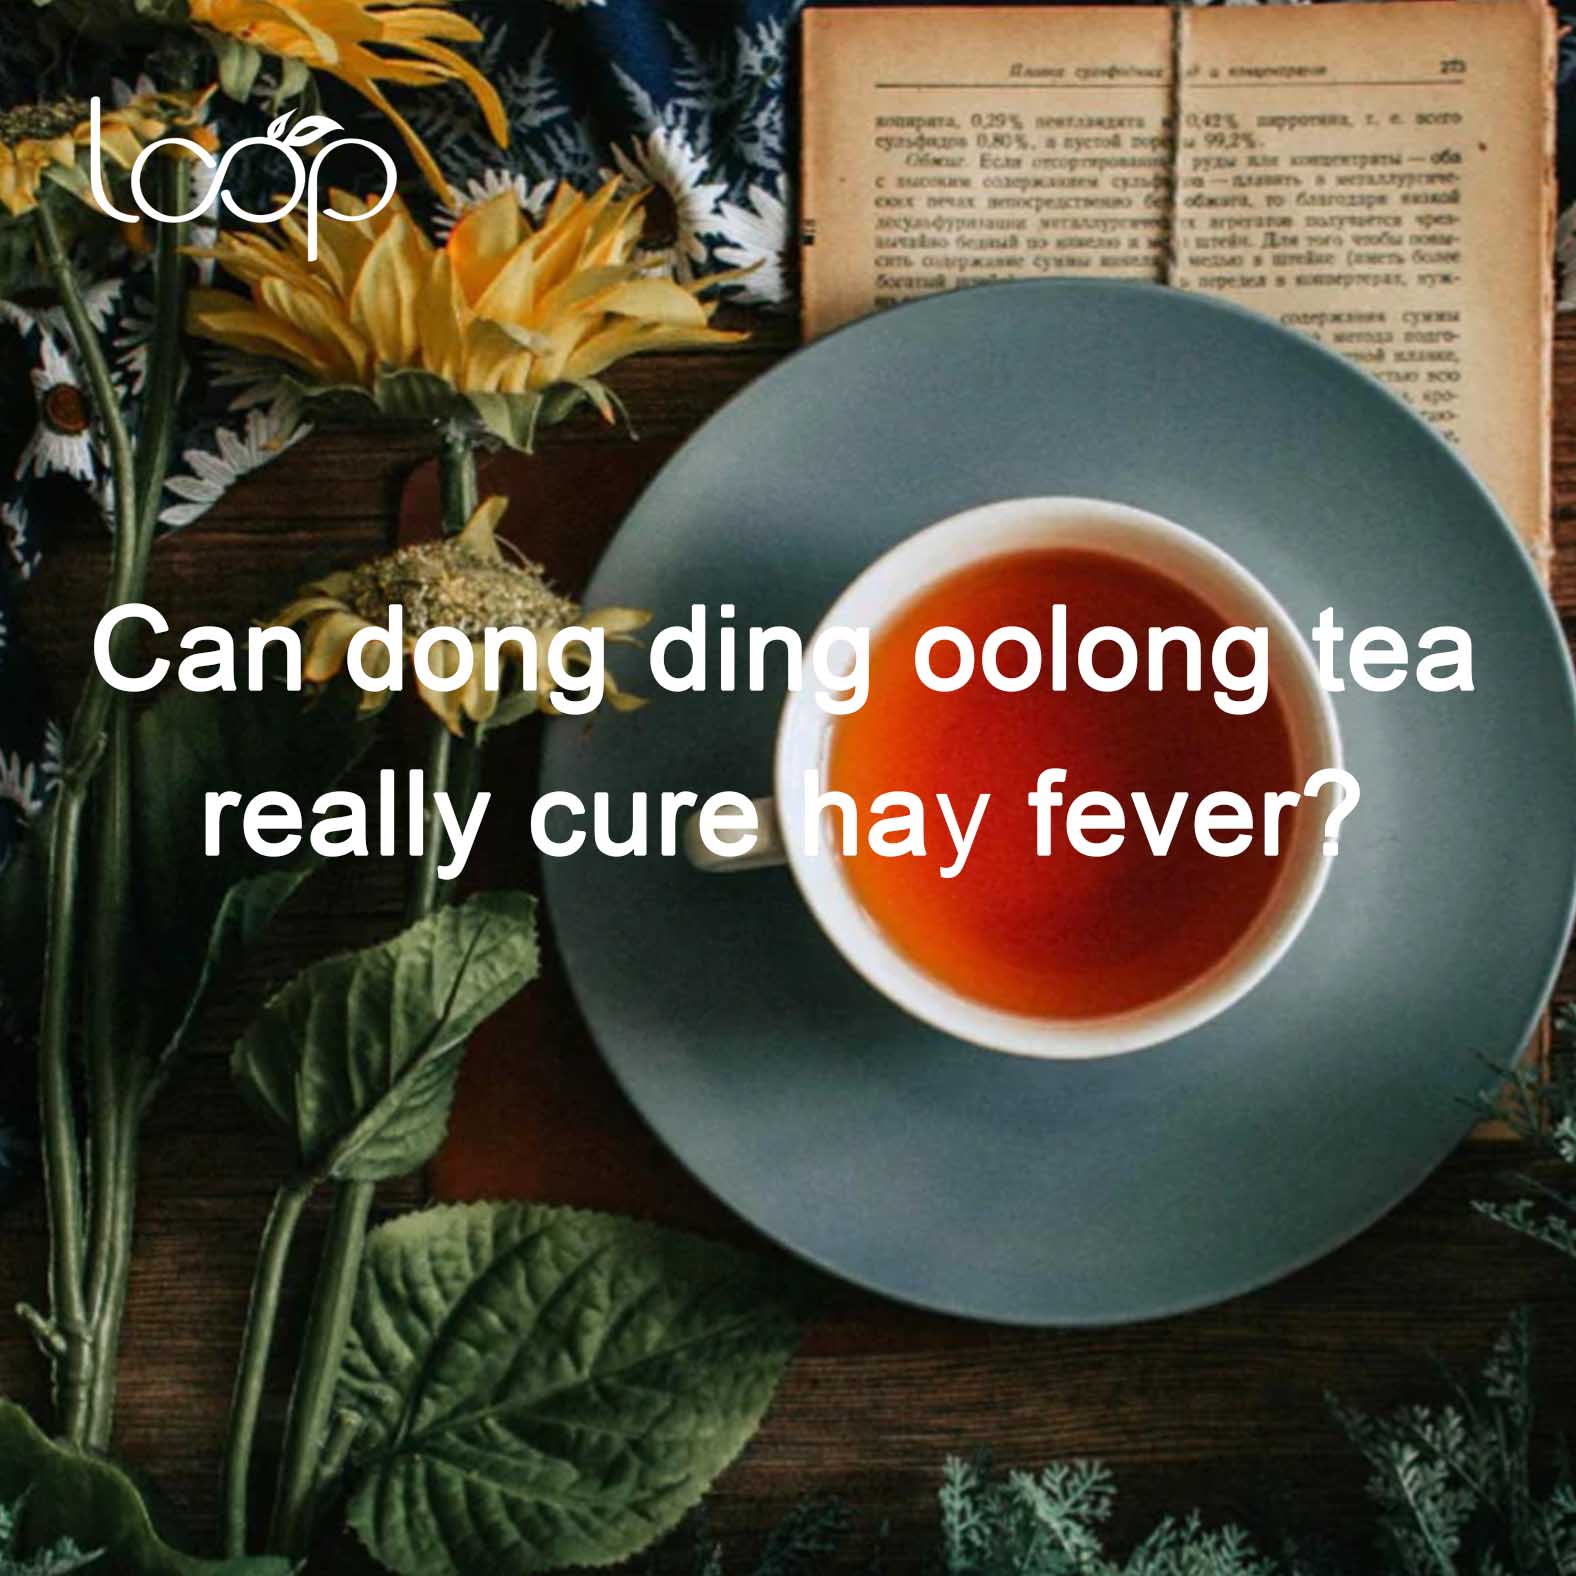 Can dong ding oolong tea really cure hay fever?